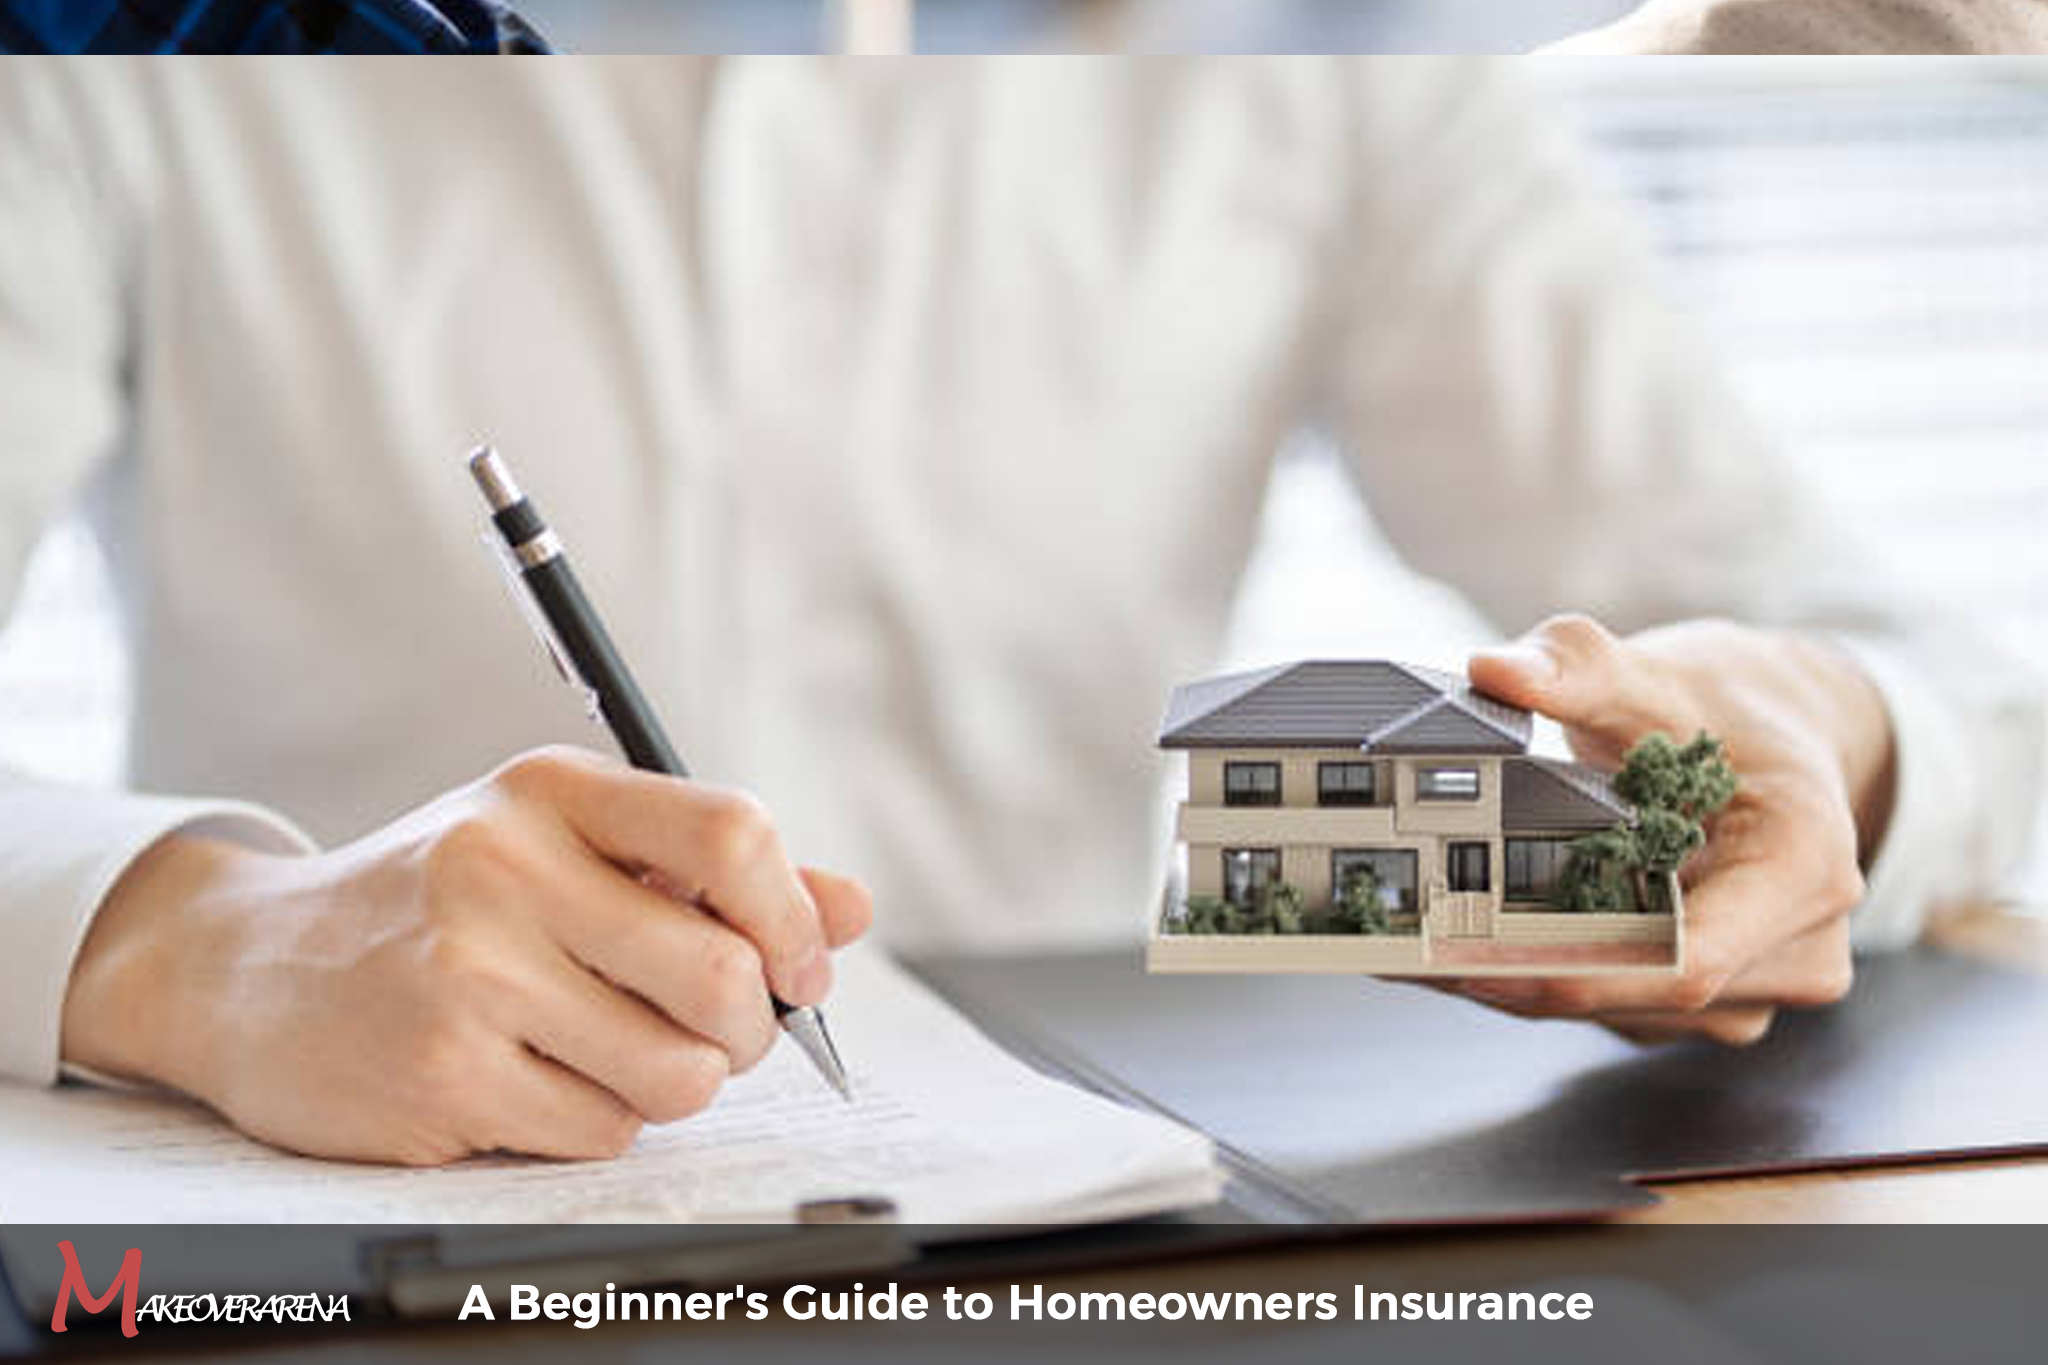 A Beginner's Guide to Homeowners Insurance